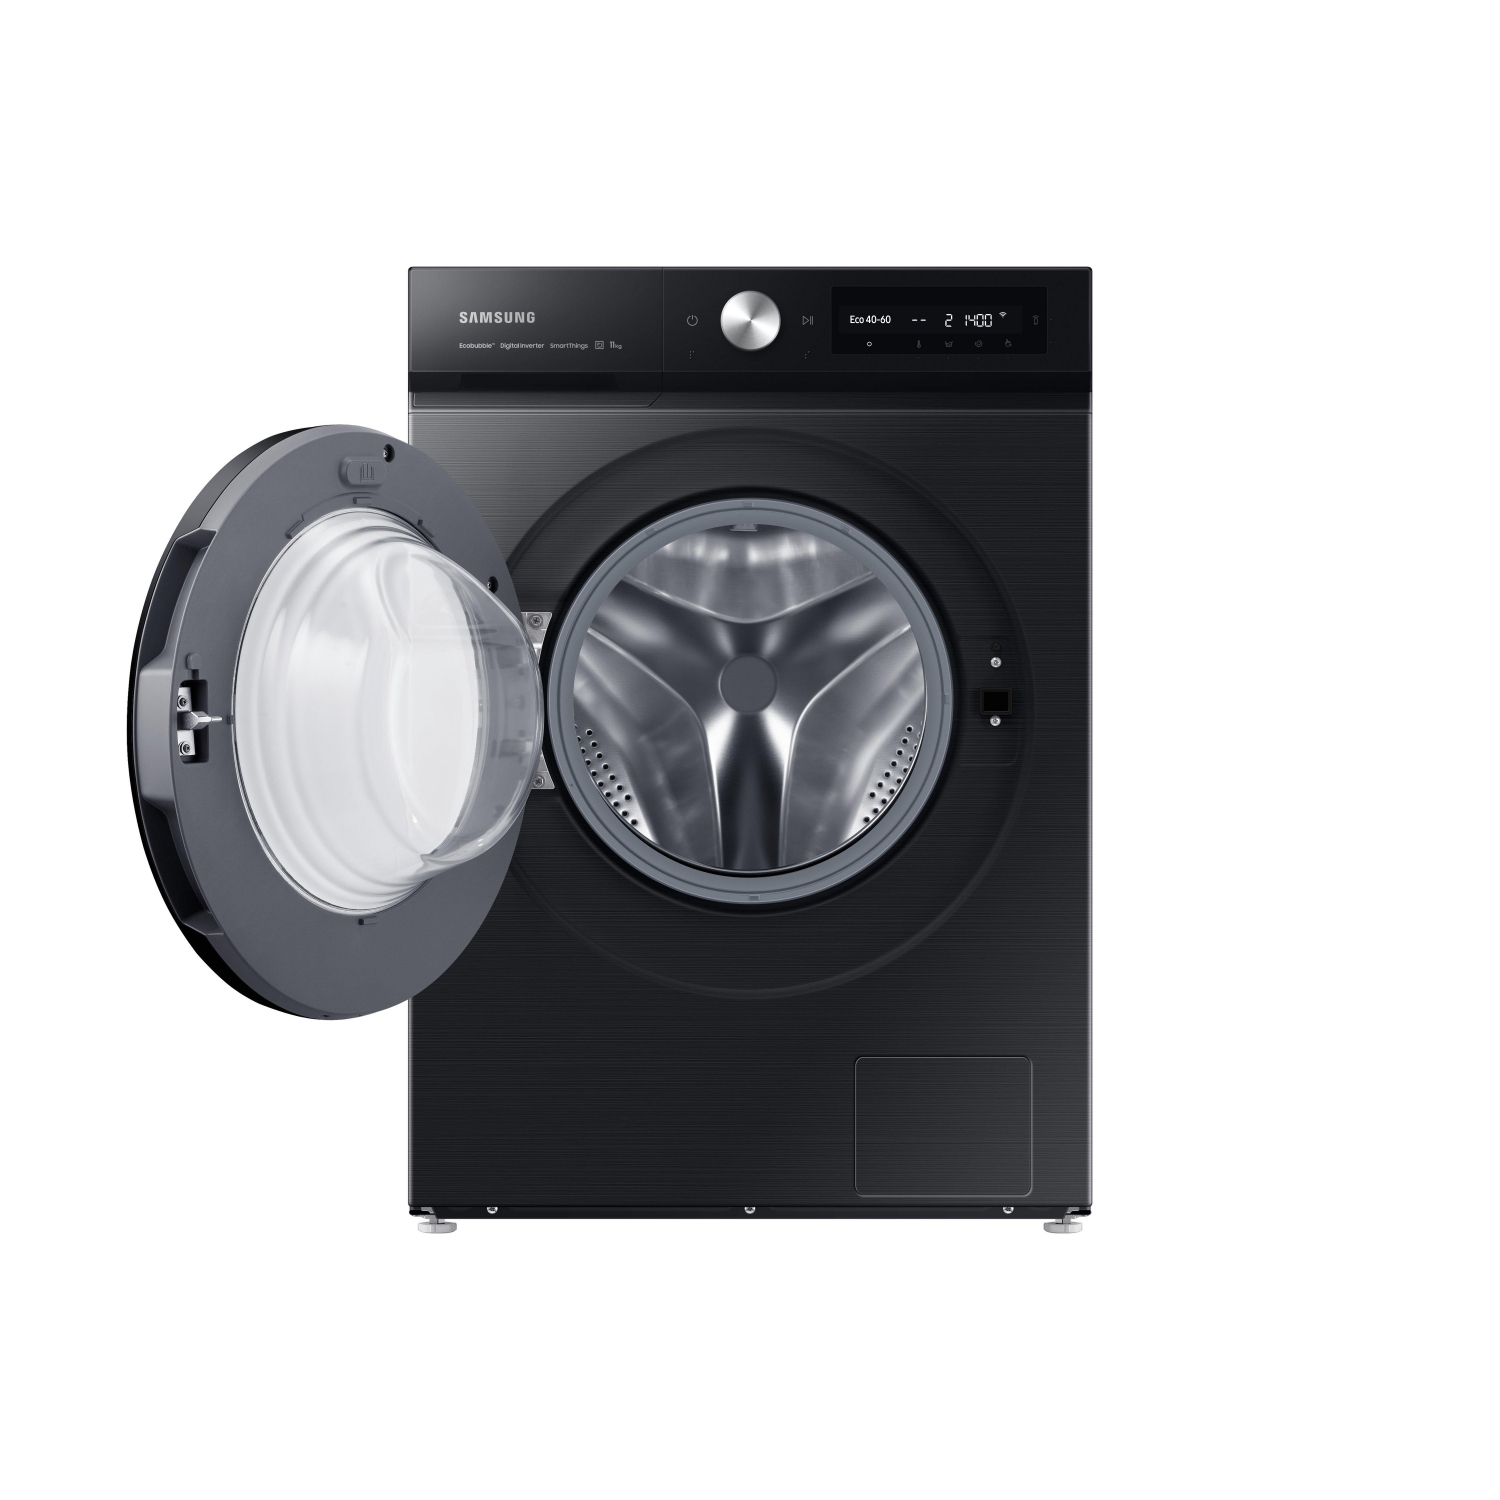 Samsung WW11BB504DABS1 11kg 1400 Spin Washing Machine with EcoBubble - Black  - 5